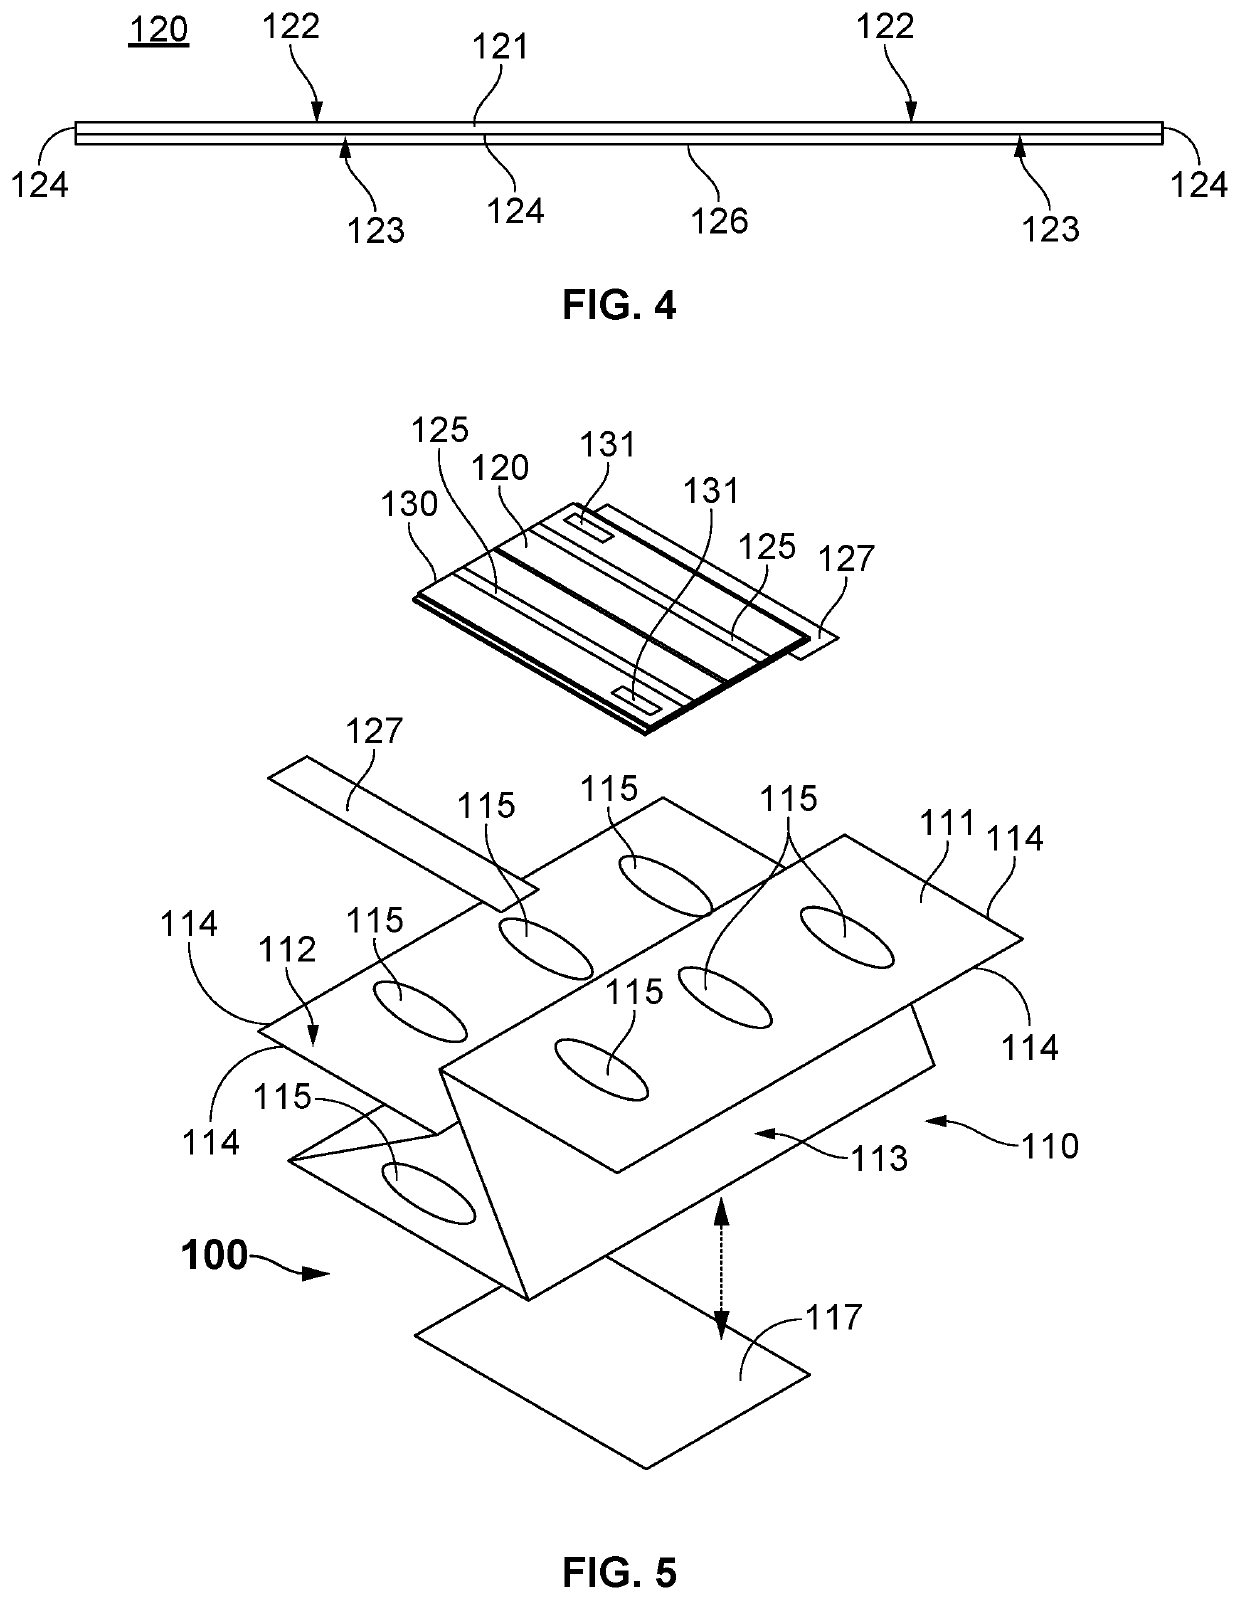 Article of manufacture, patient pad system and method for a surgical procedure